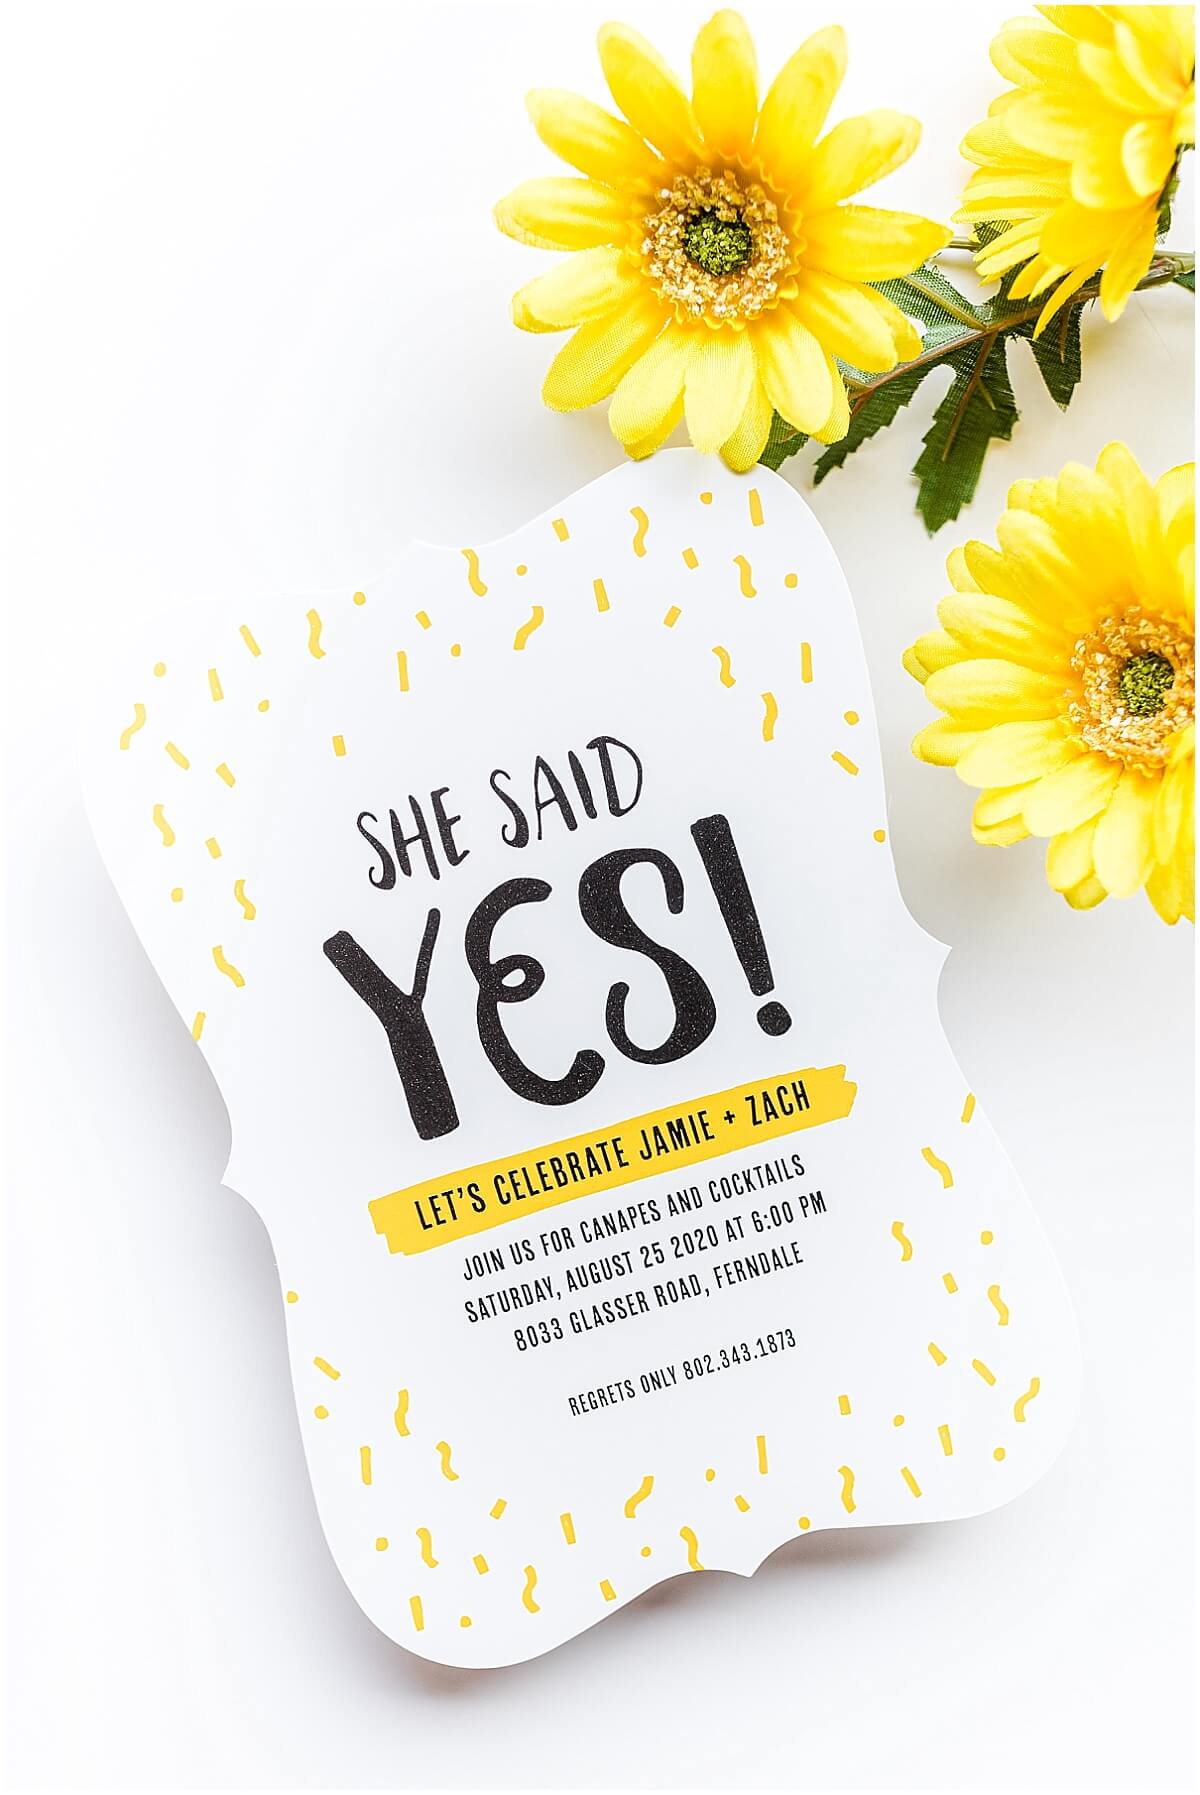 Yellow confetti engagement party invitation that says "She said YES!"